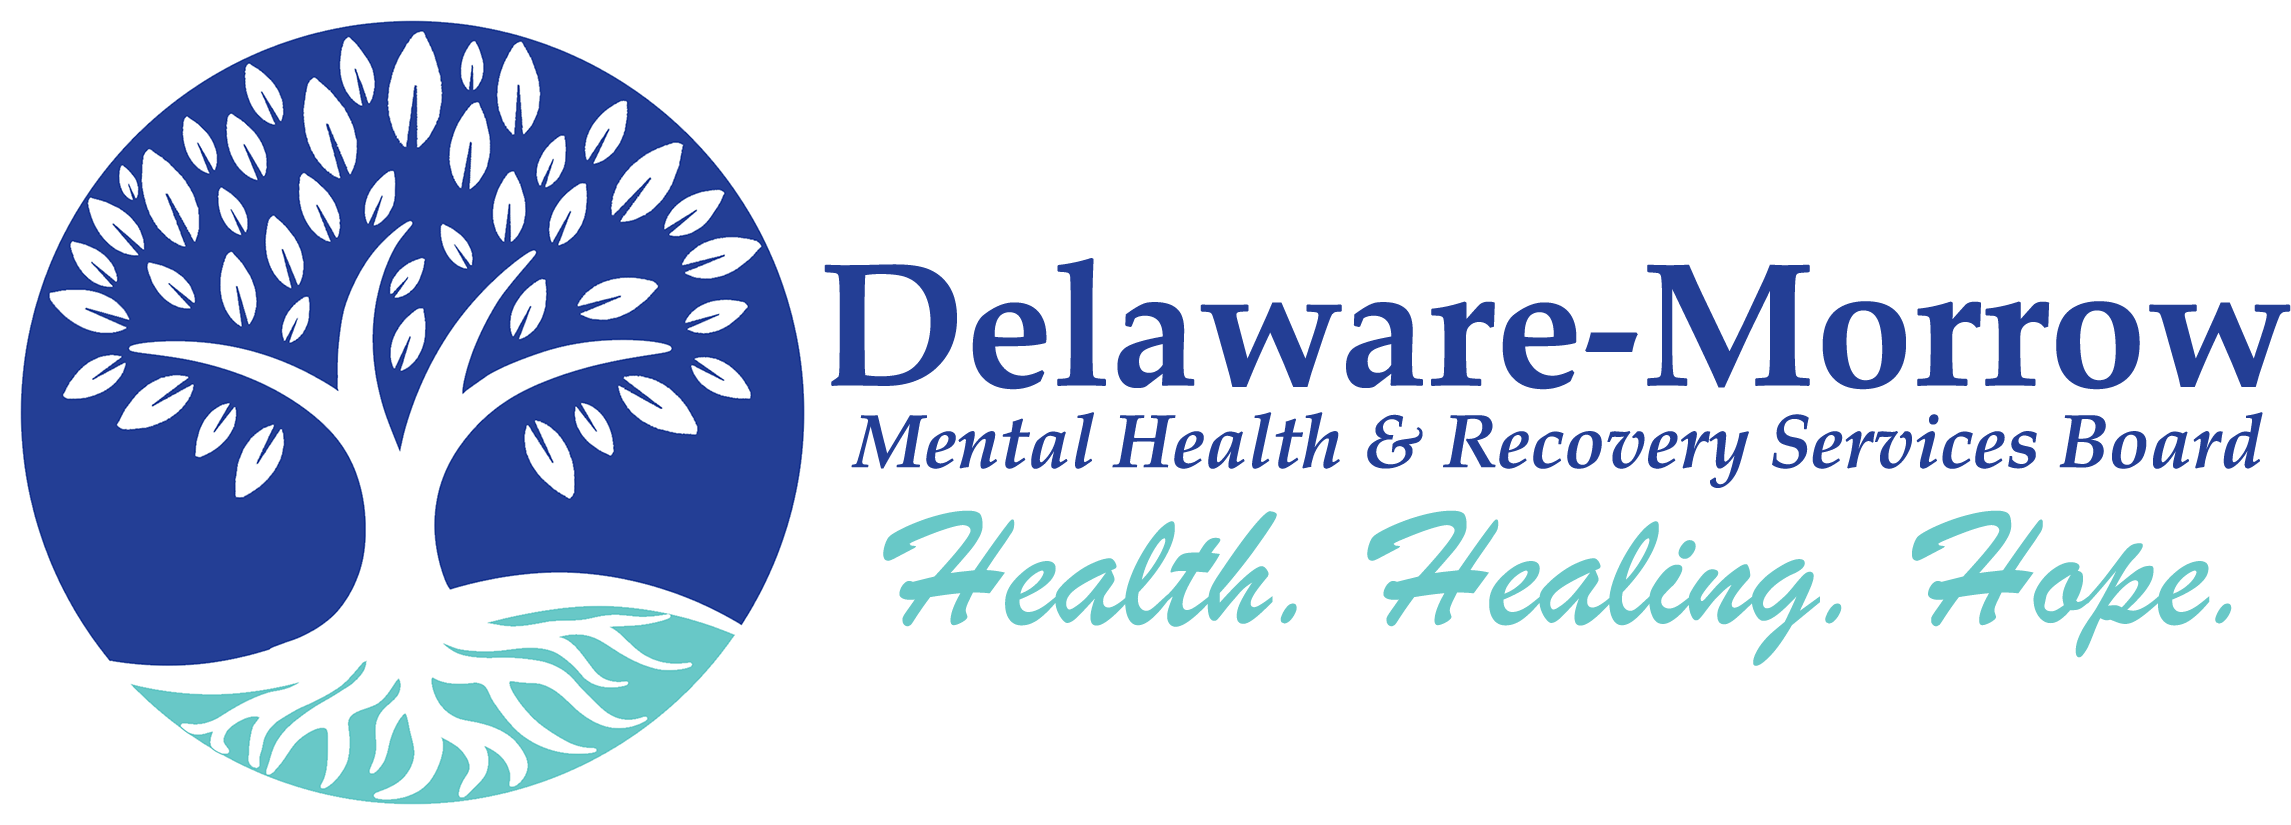 Del-Morrow-Logo-With-Text-and-Slogan